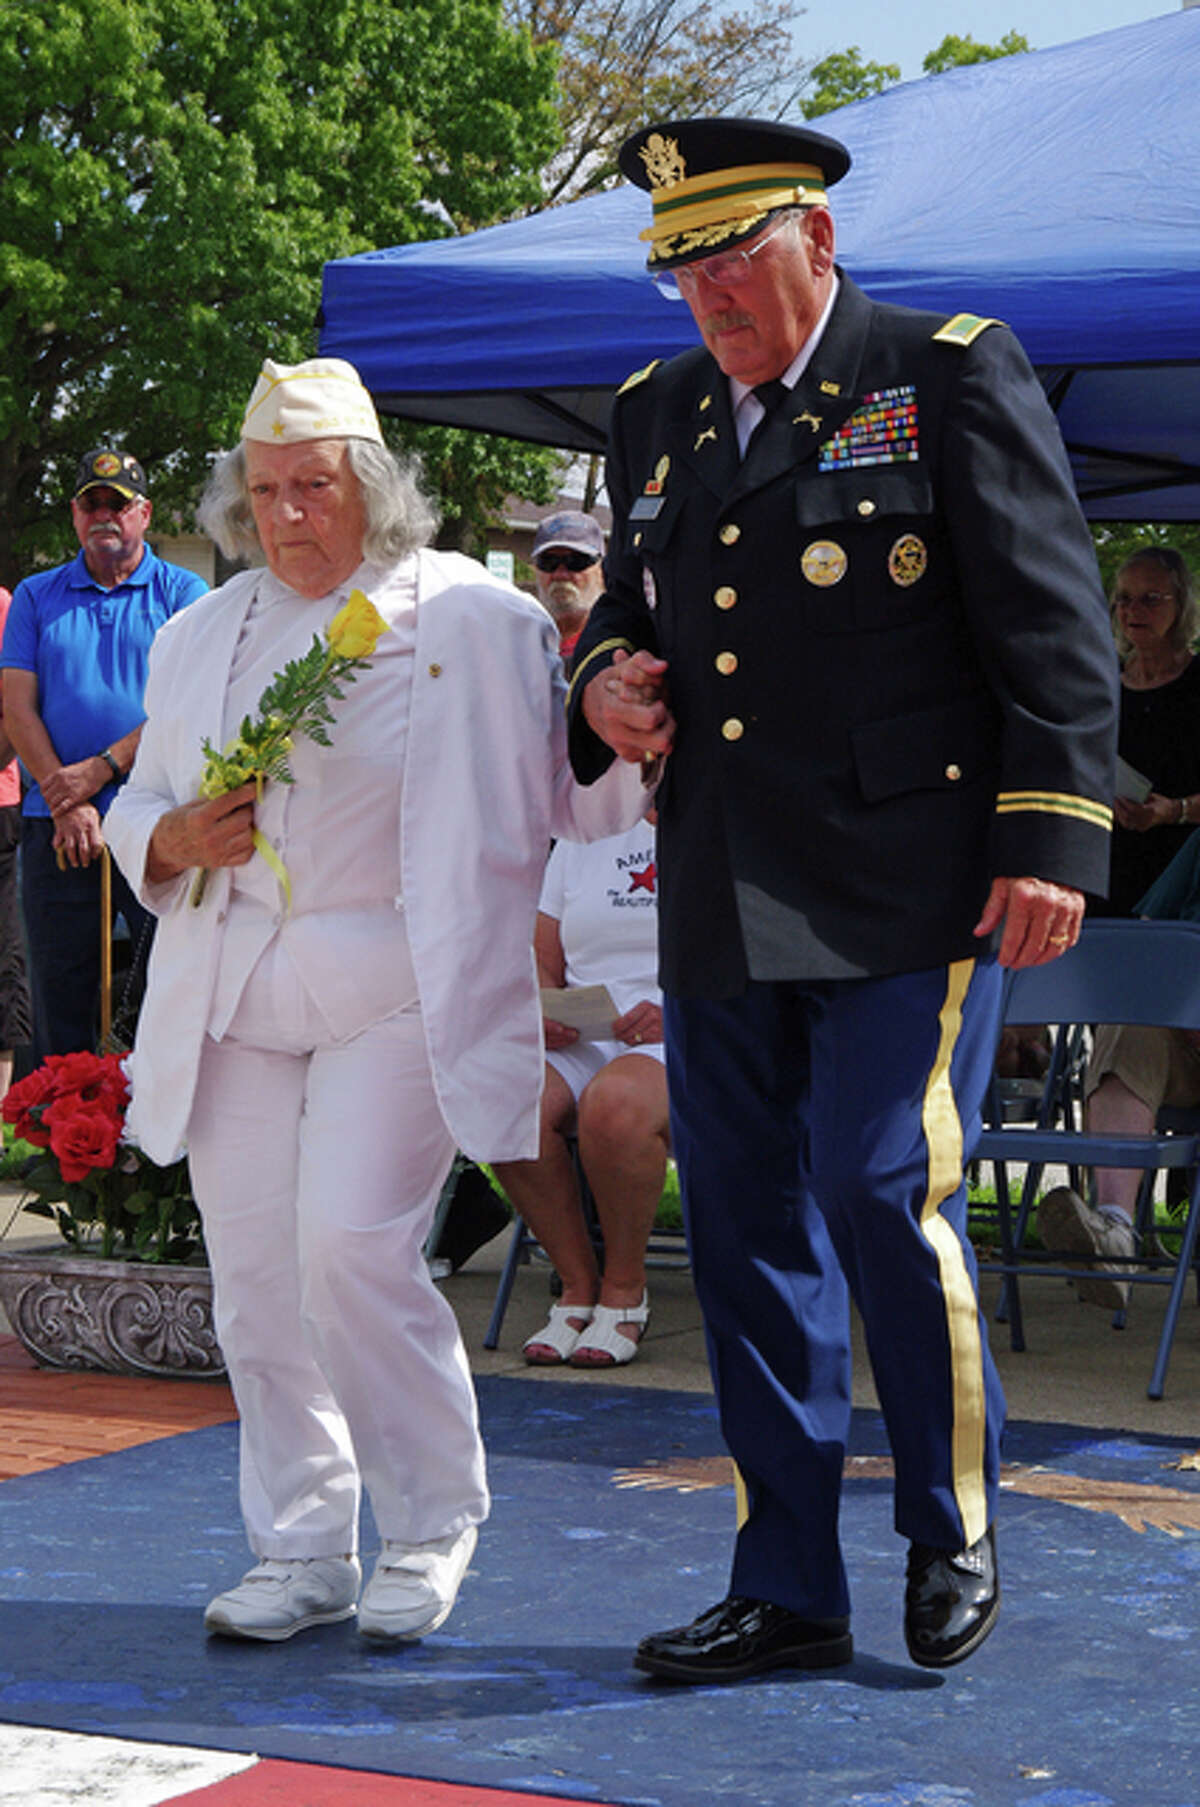 Gold Star mother Deloris Molloy walks toward the War Memorial to place a rose during Sunday’s Gold Star Mothers Ceremony in Jerseyville. Escorting her is retired U.S. Army Chief Warrant Officer 4 Terry Day.